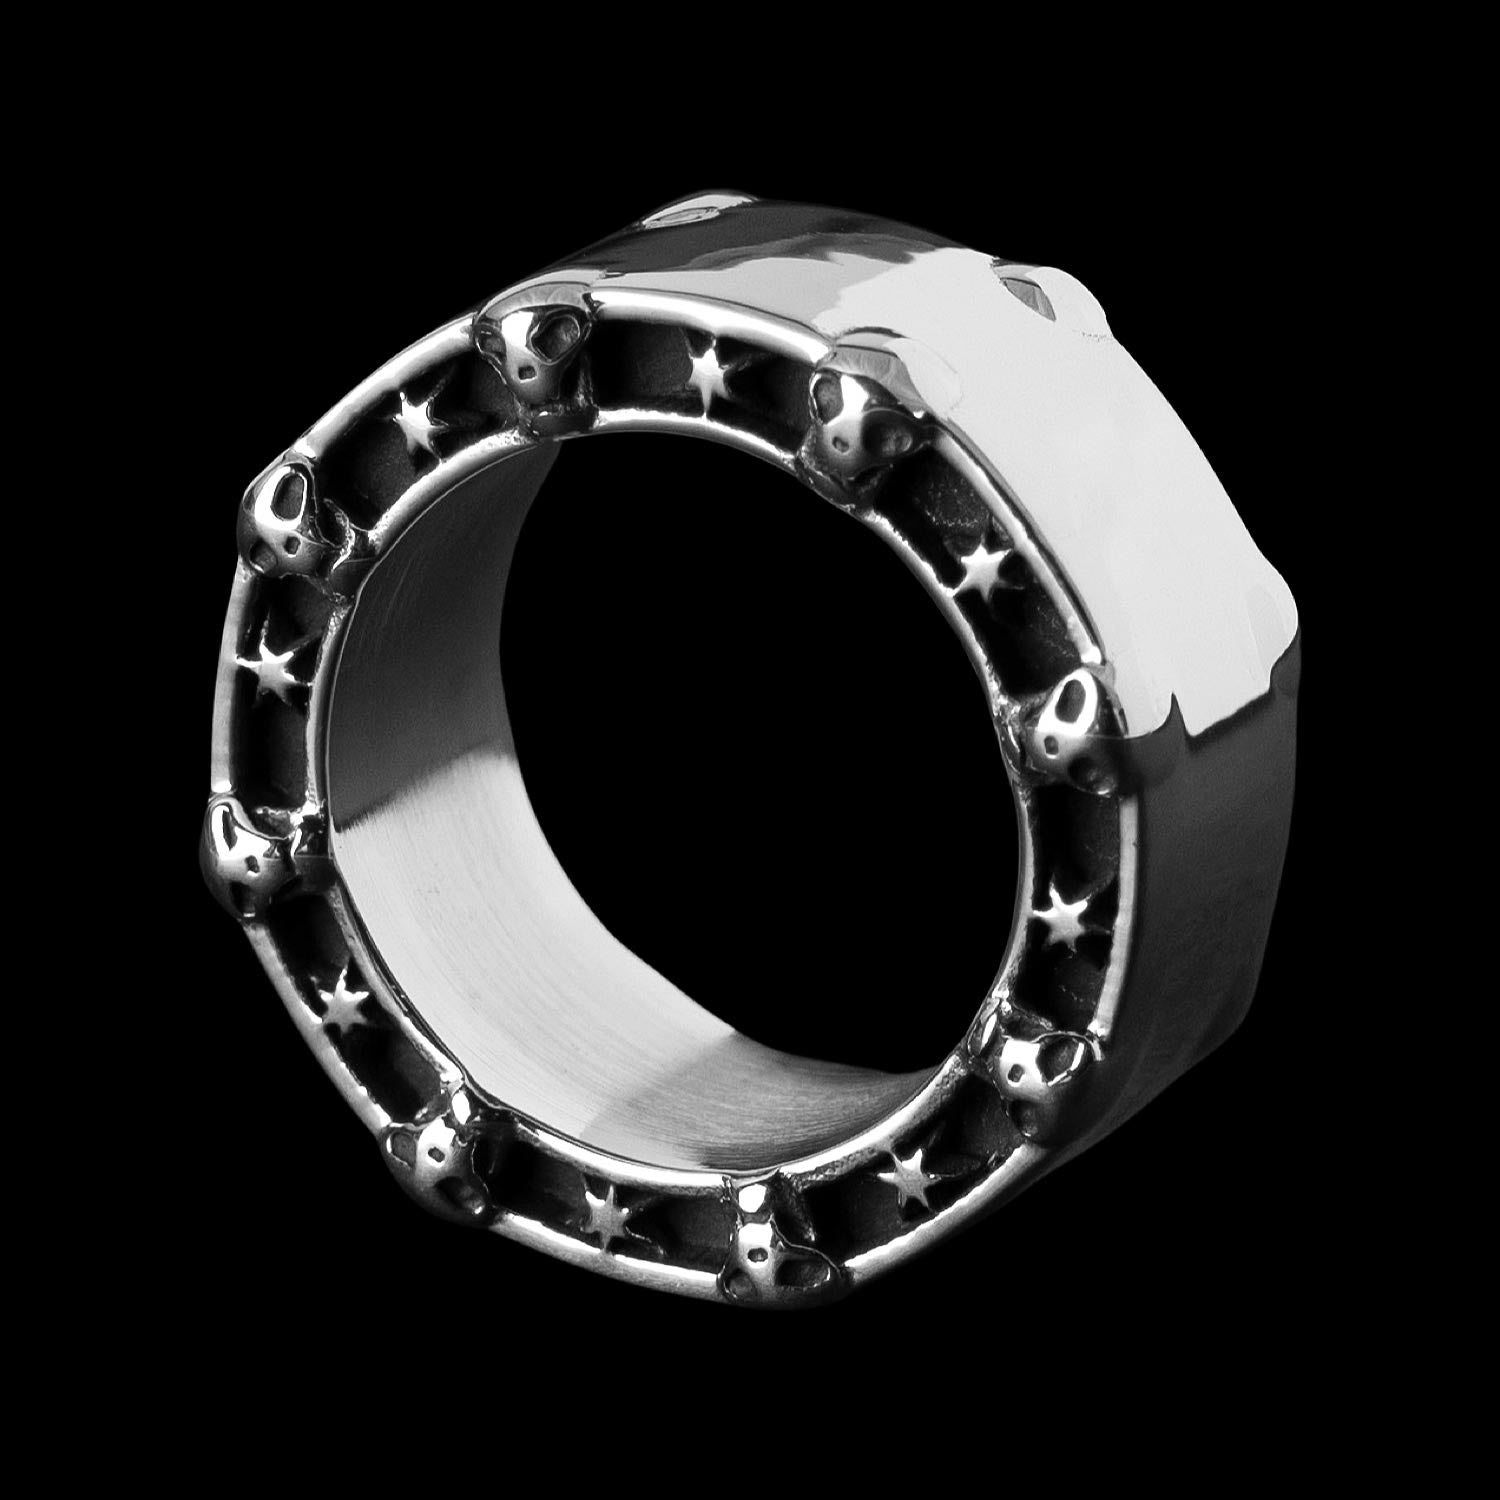 The Personal Fears Stainless Steel Head Honcho Ring